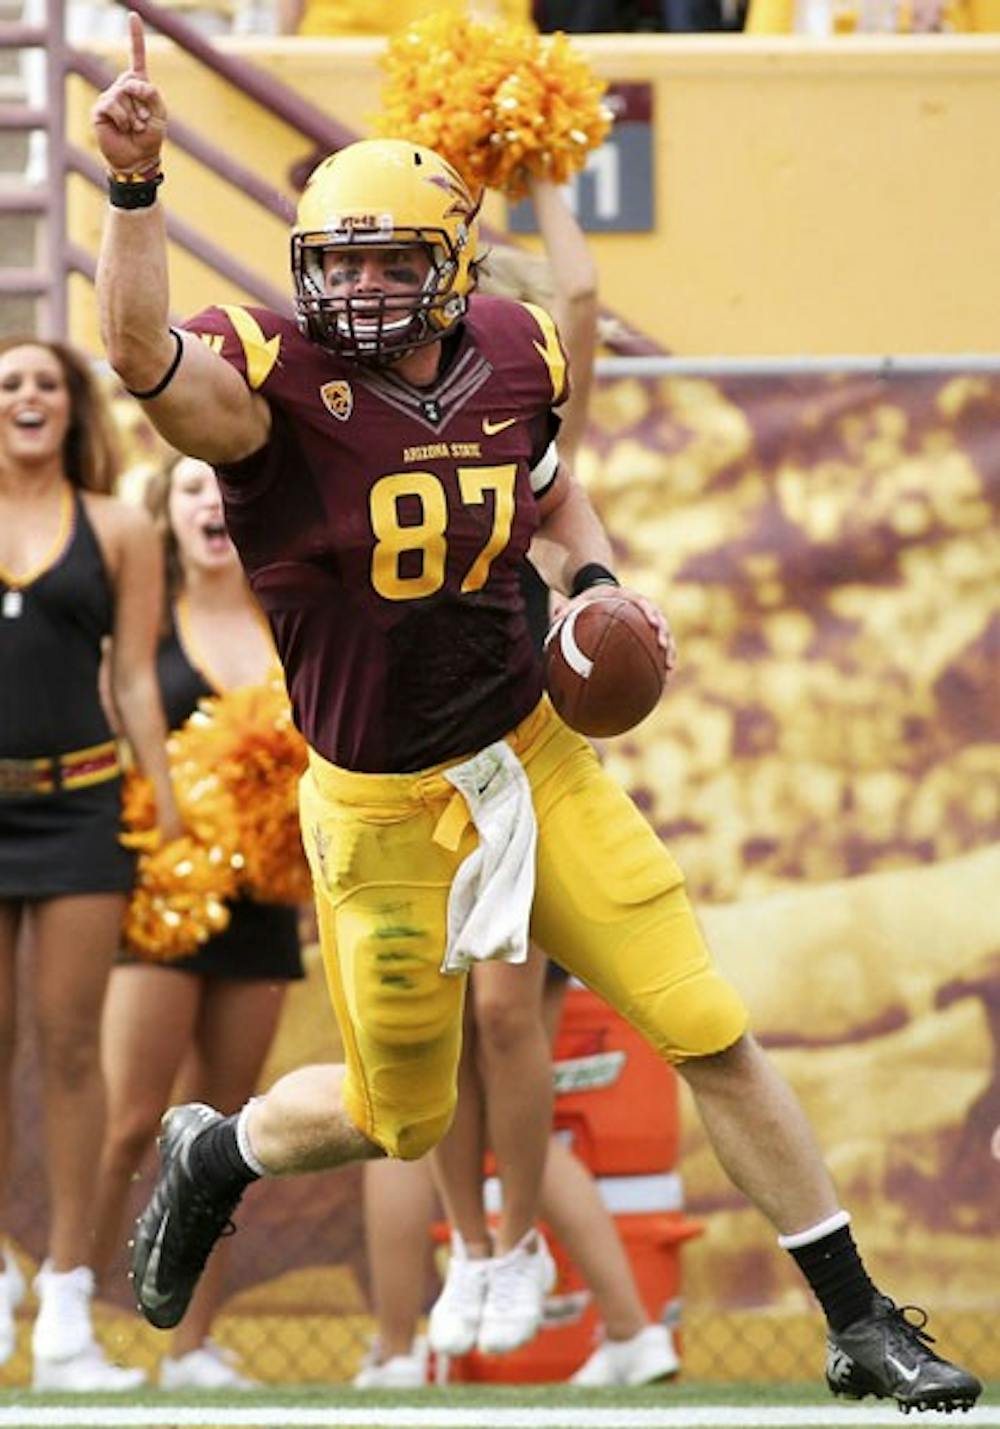 Junior tight end Chris Coyle celebrates after scoring a touchdown in the first quarter during the Sun Devils’ 46-7 win over Washington State on Nov. 17. (Photo by Sam Rosenbaum)